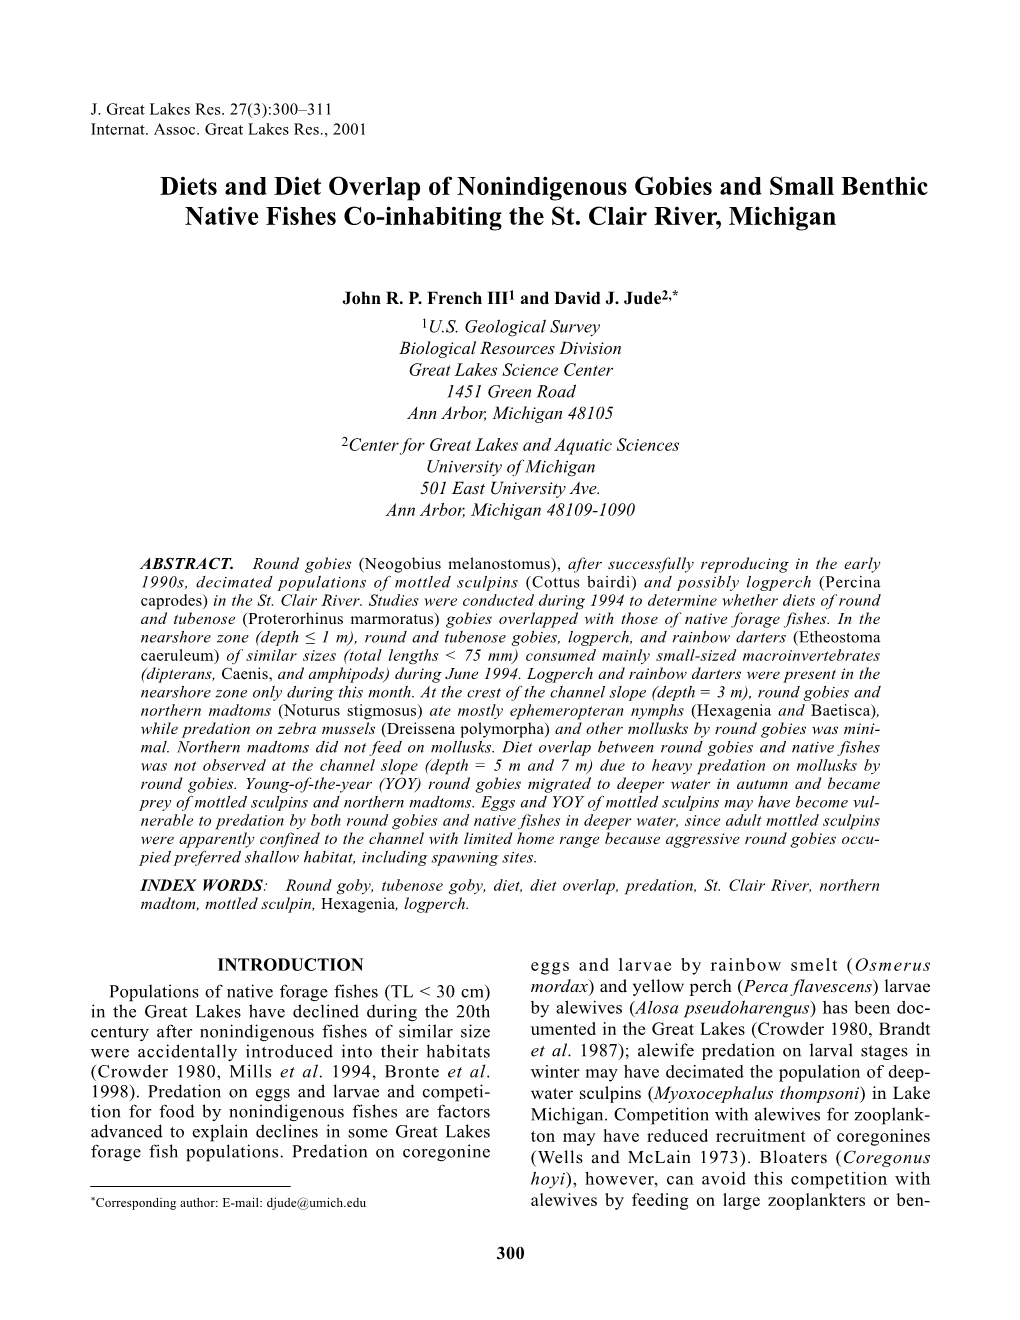 Diets and Diet Overlap of Nonindigenous Gobies and Small Benthic Native Fishes Co-Inhabiting the St. Clair River, Michigan